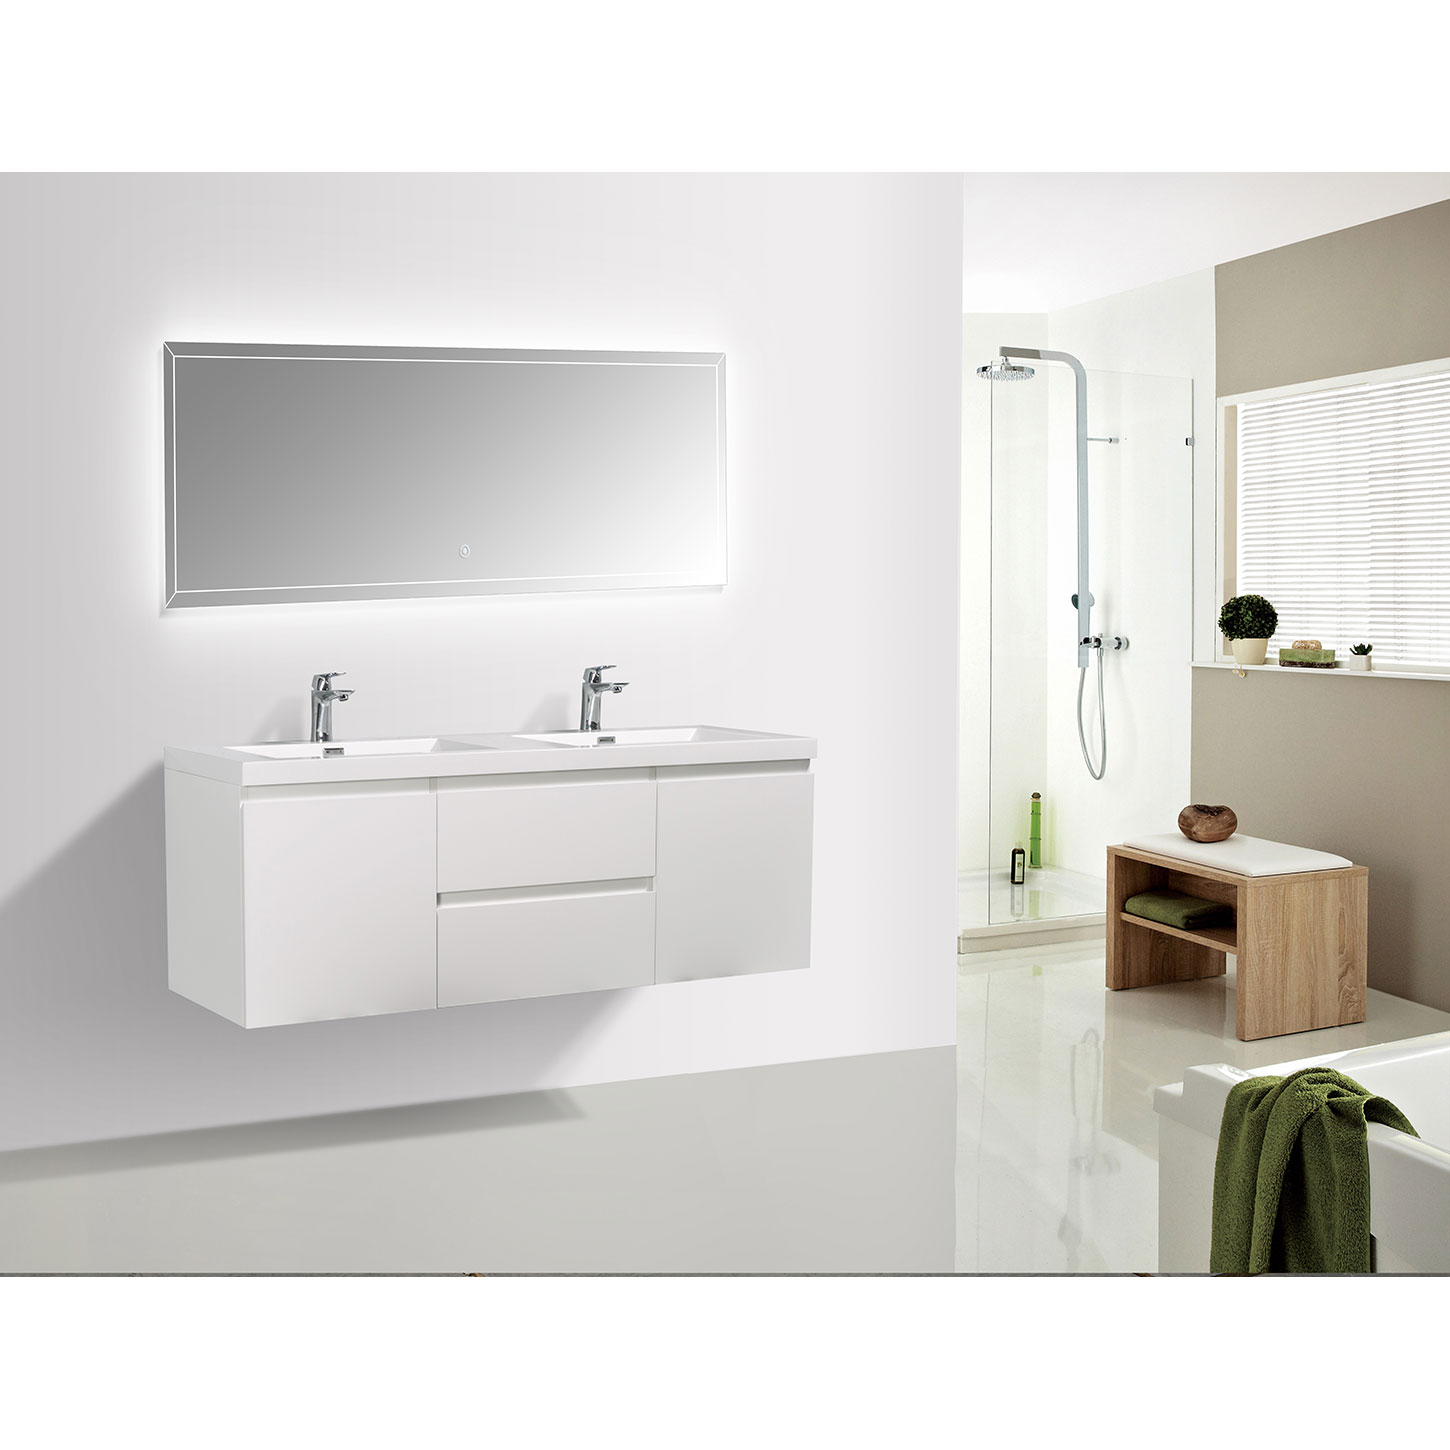 https://www.conceptbaths.com/images/detailed/16/60-double-vanity-white-LS-AG60-HGW-2.jpg